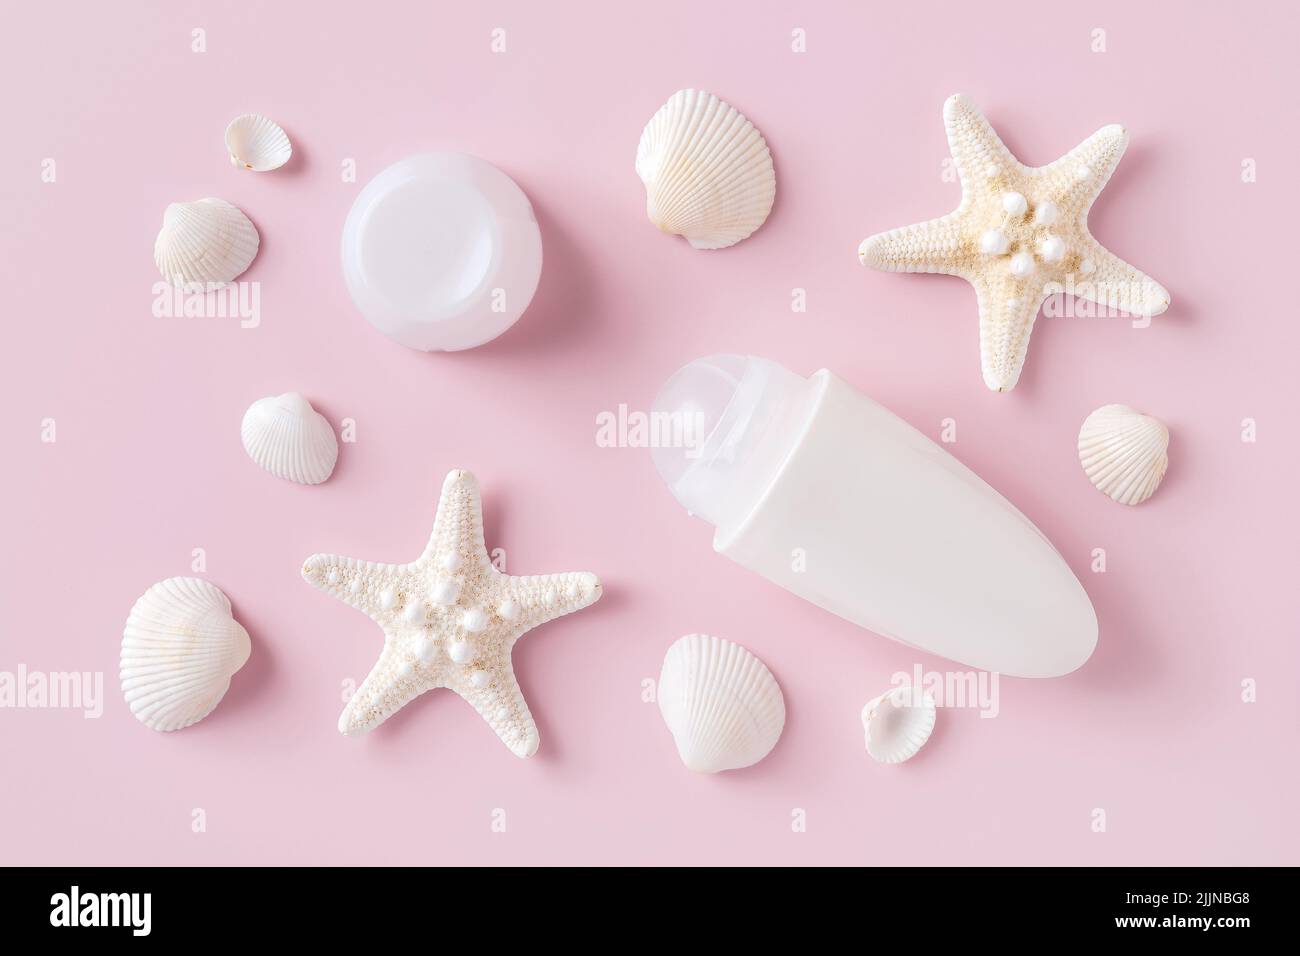 Roll on deodorant antiperspirant, sea stars and shells over pastel pink background. Sea minerals toiletries and cosmetics for body care. Toiletries. Stock Photo